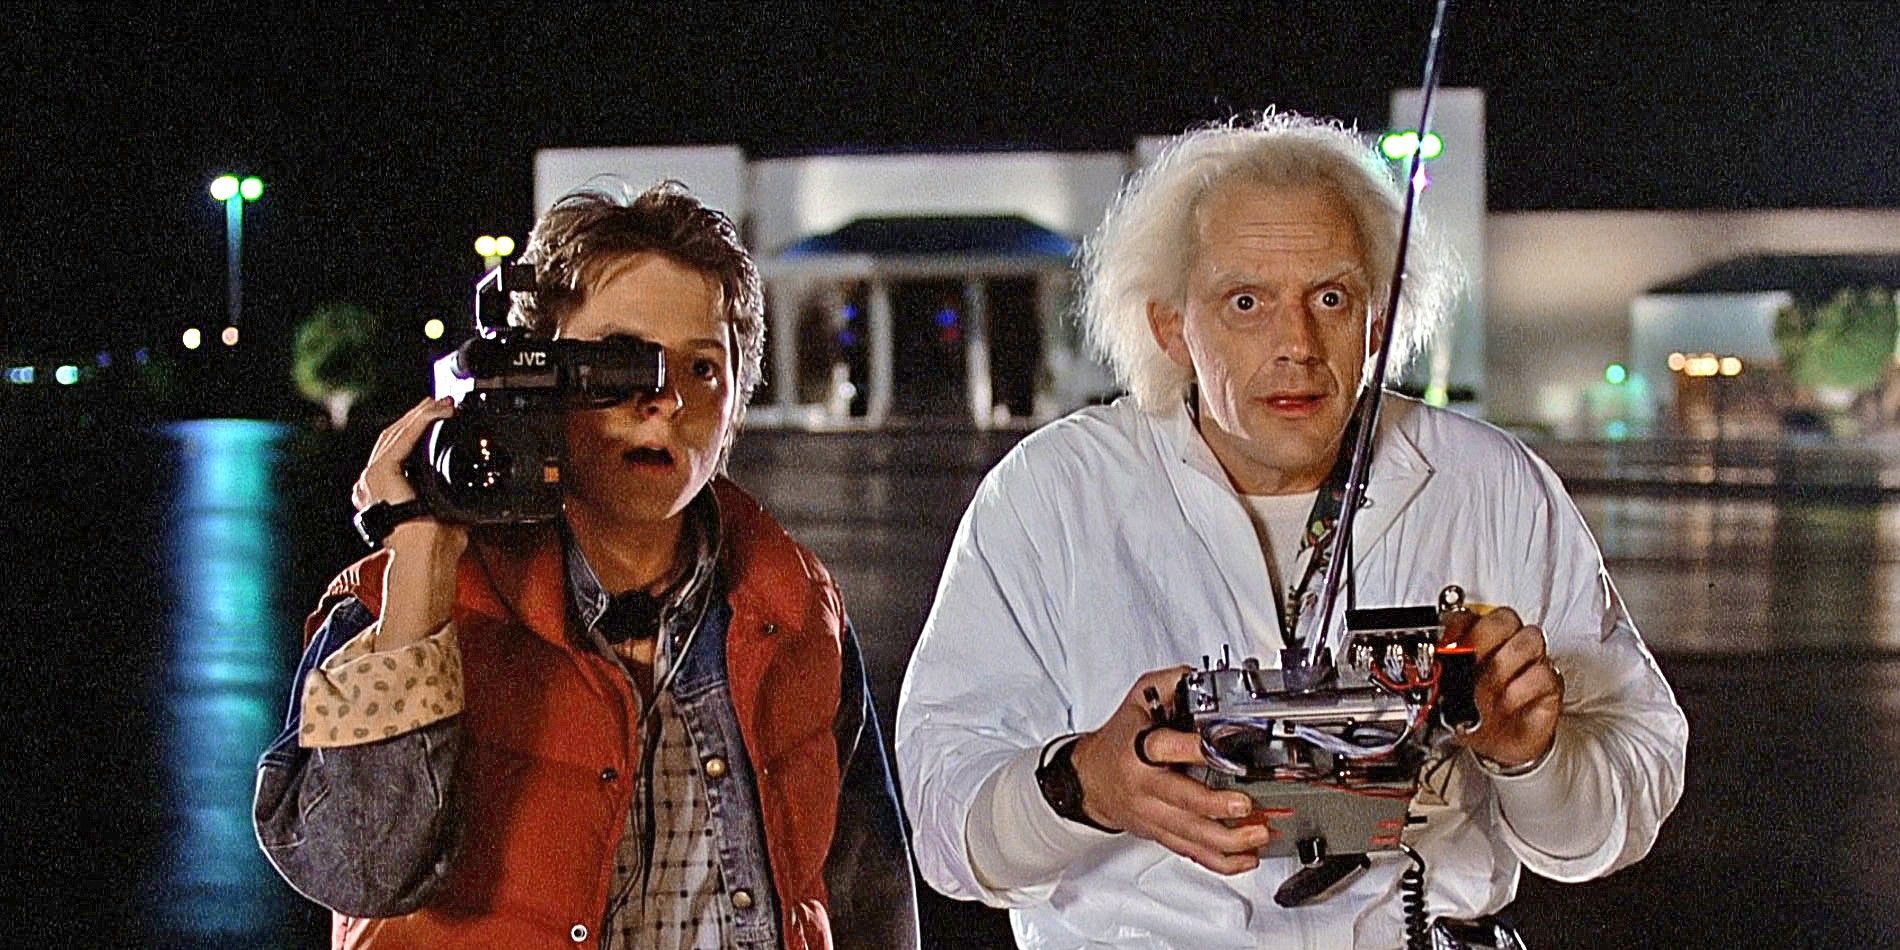 Michael J Fox as Marty McFly and Christopher Lloyd as Doc Brown in Back To The Future